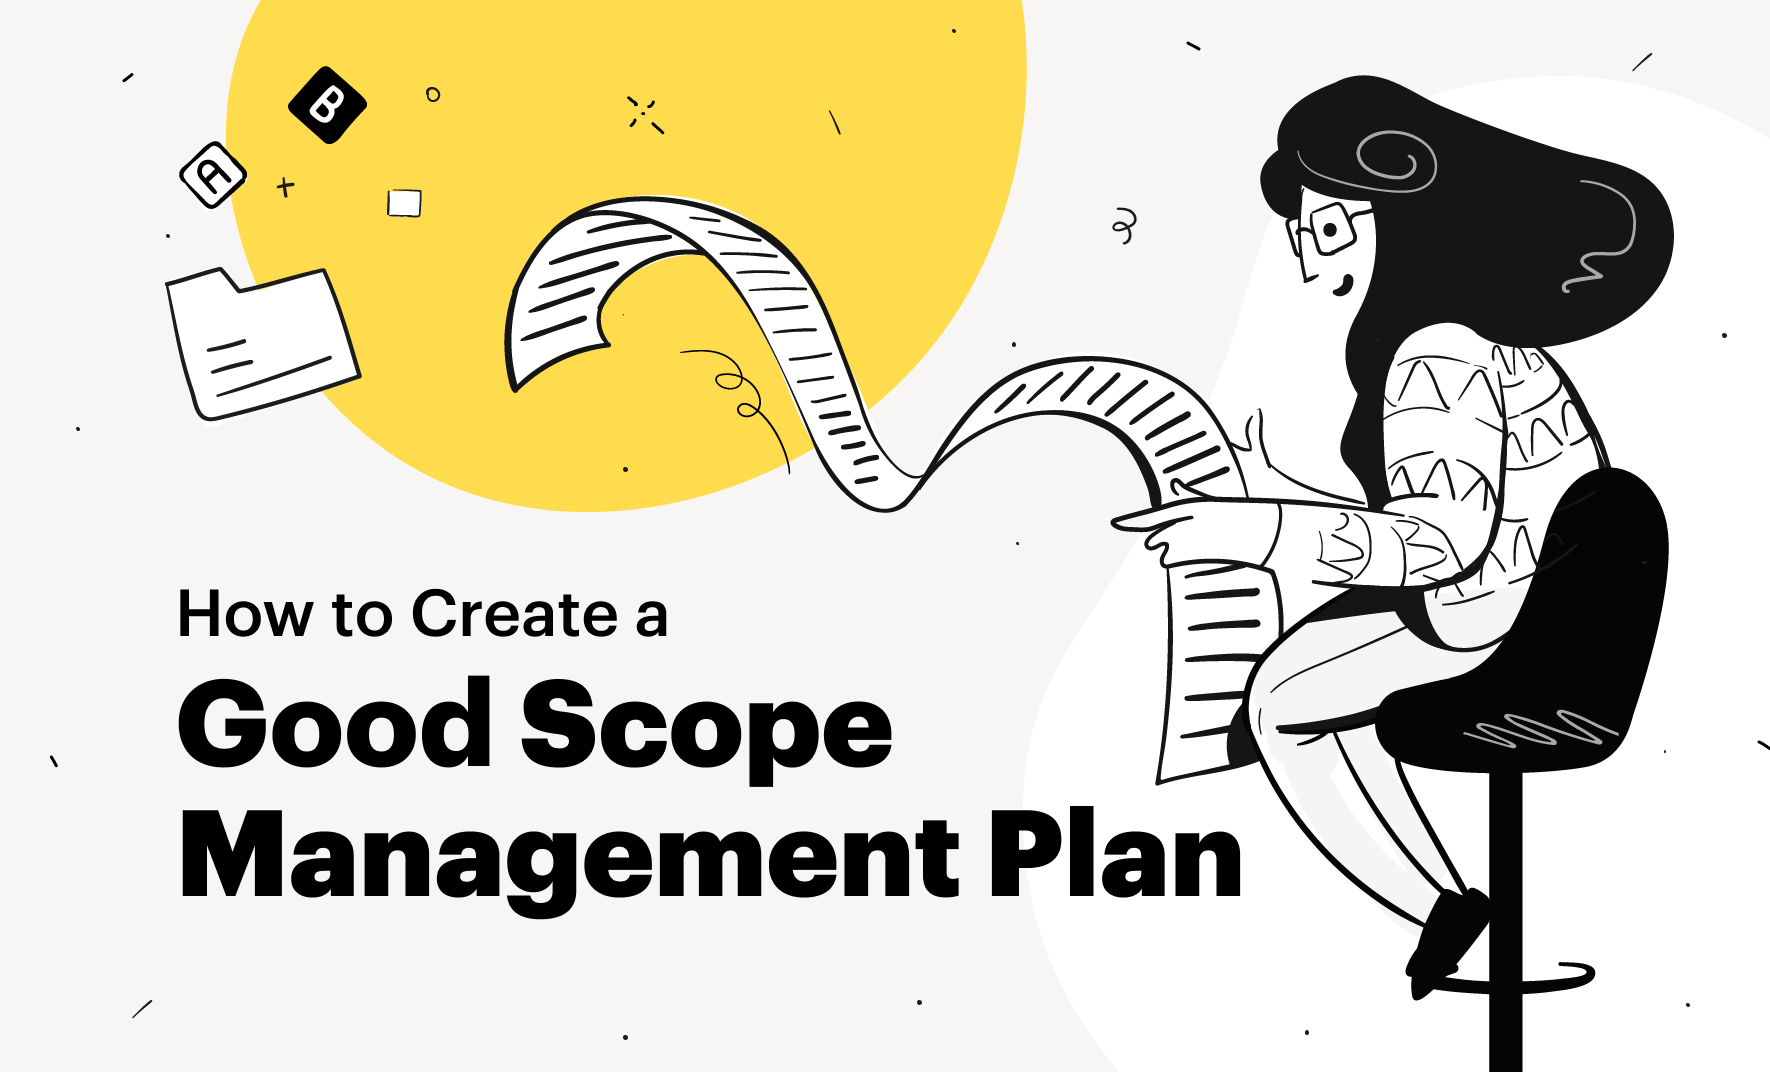 How to Create a Good Scope Management Plan